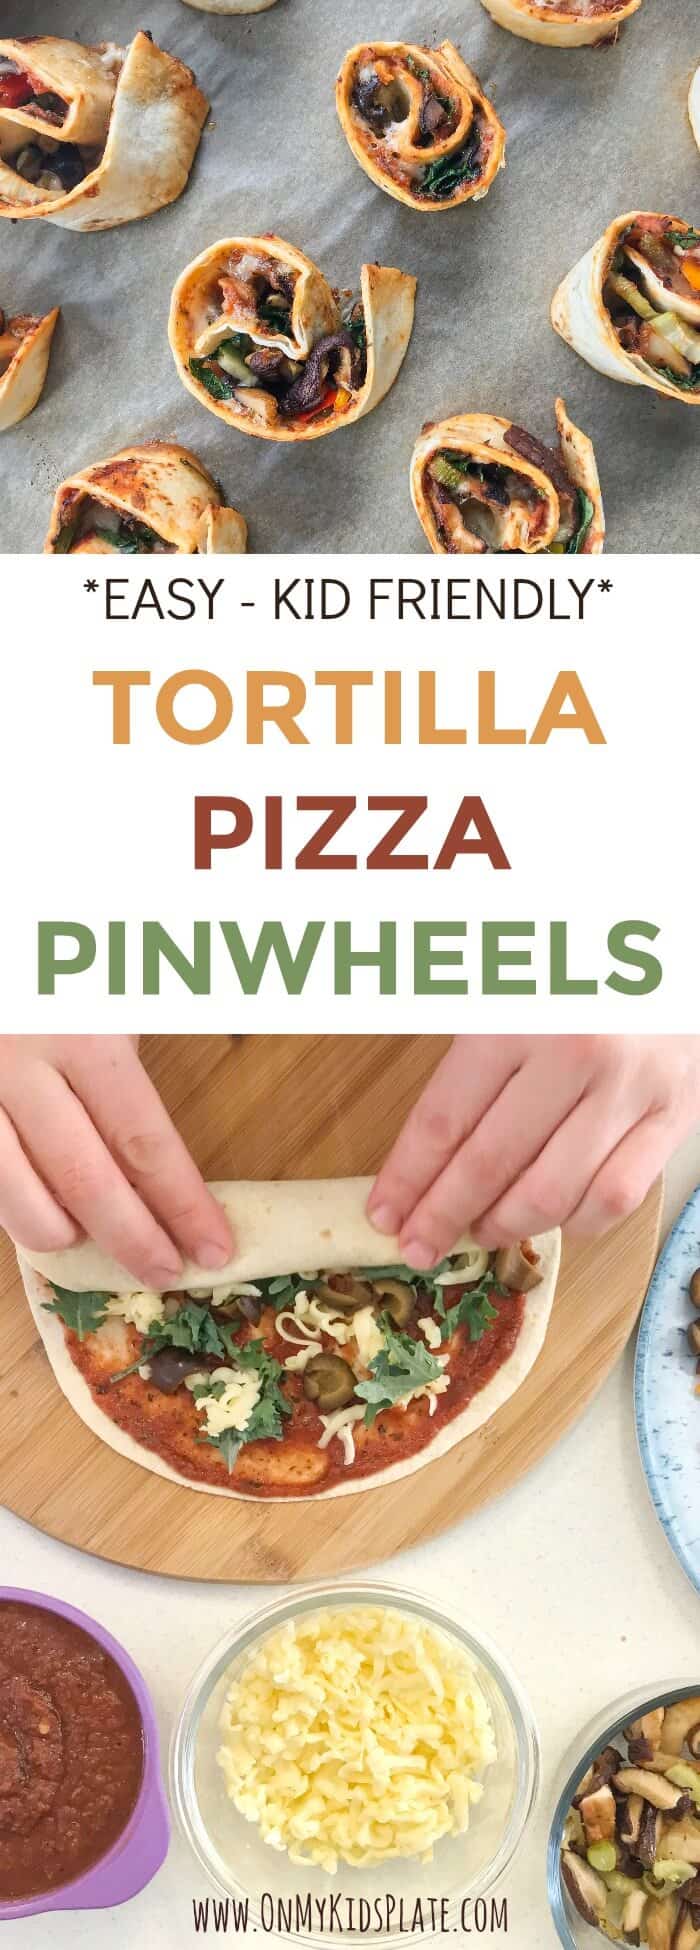 A person\'s hands wrapping a tortilla filled with pizza ingredients with text title overlay